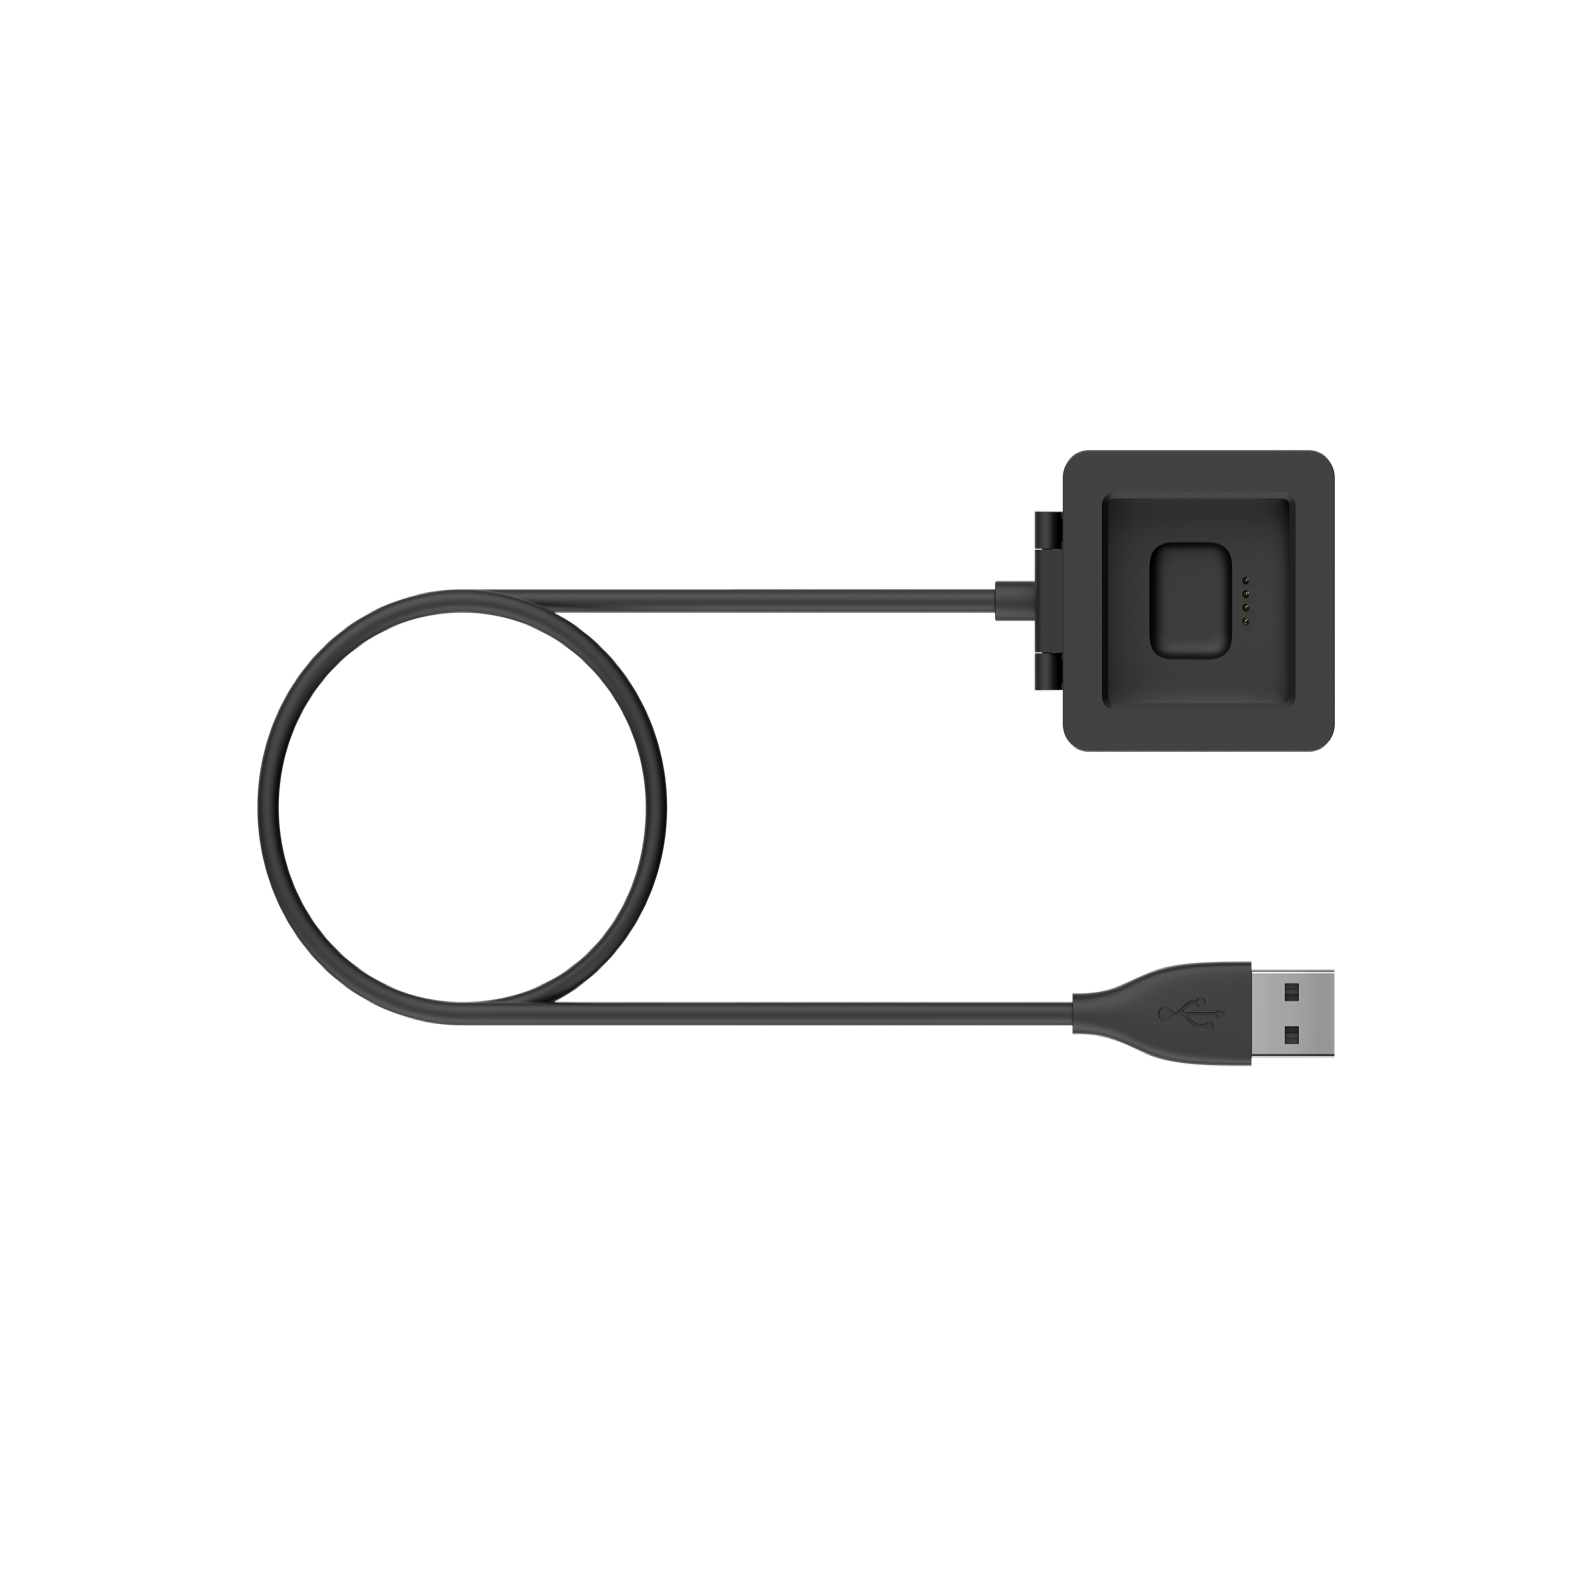 fitbit blaze charger price